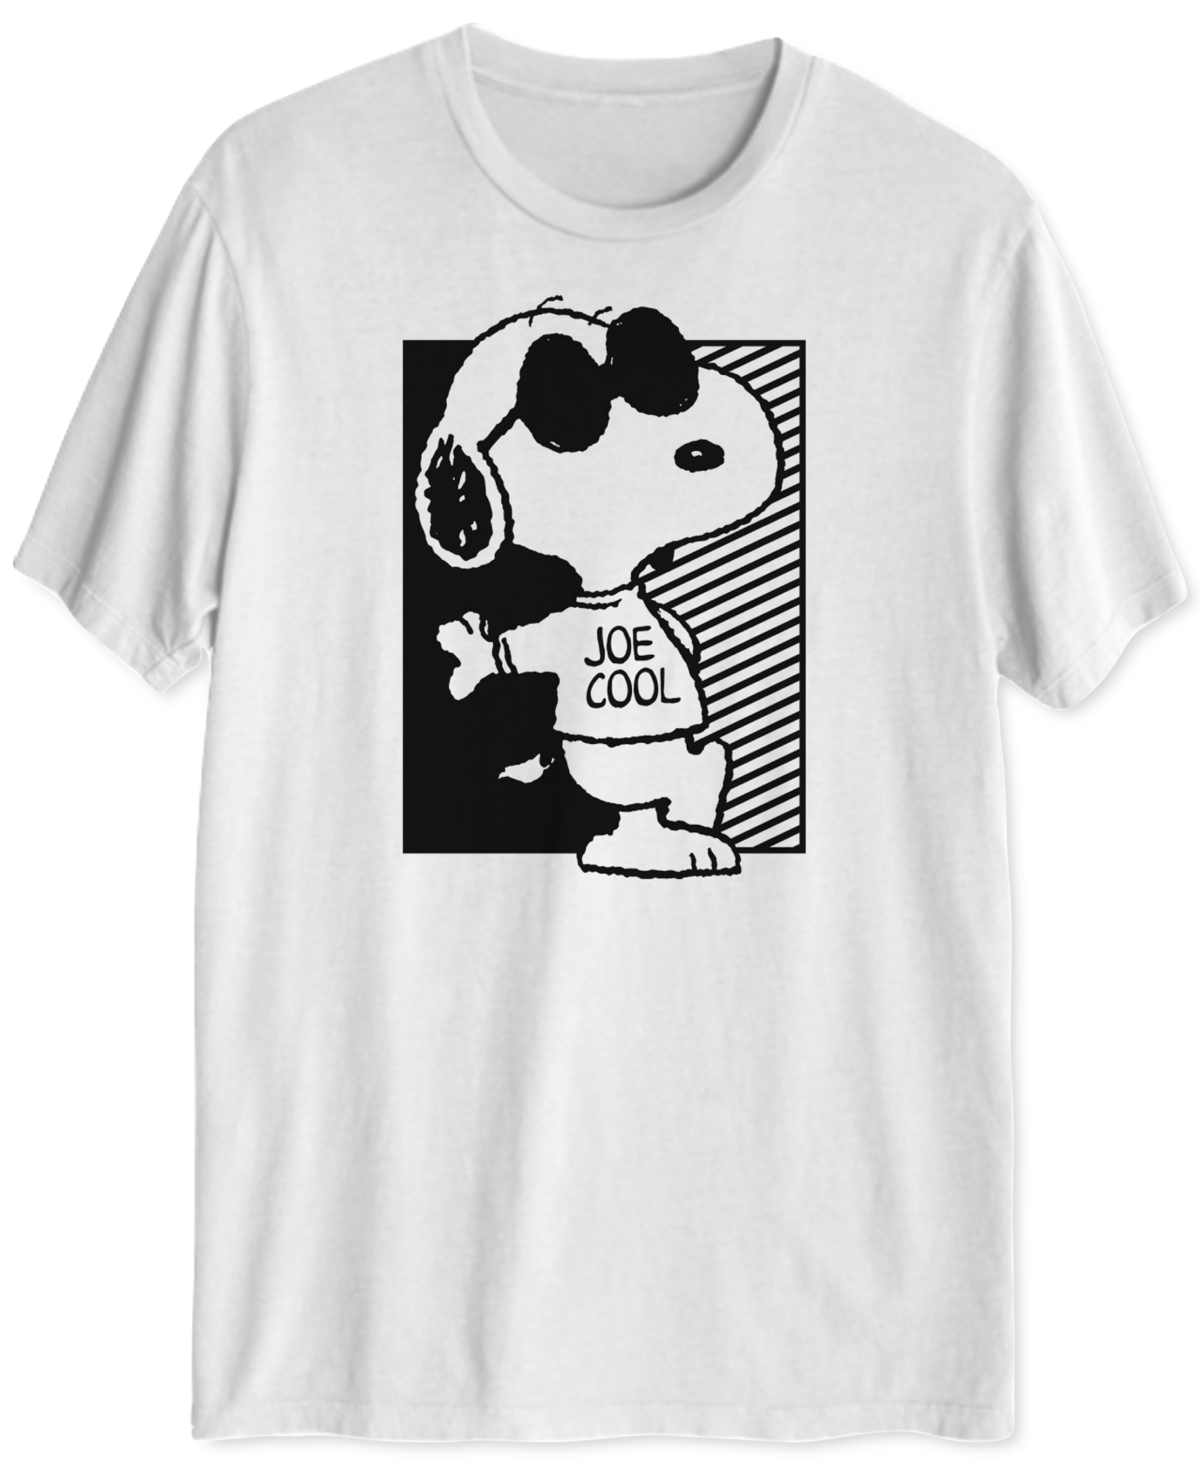 Snoopy Too Cool Men's Graphic T-Shirt - White